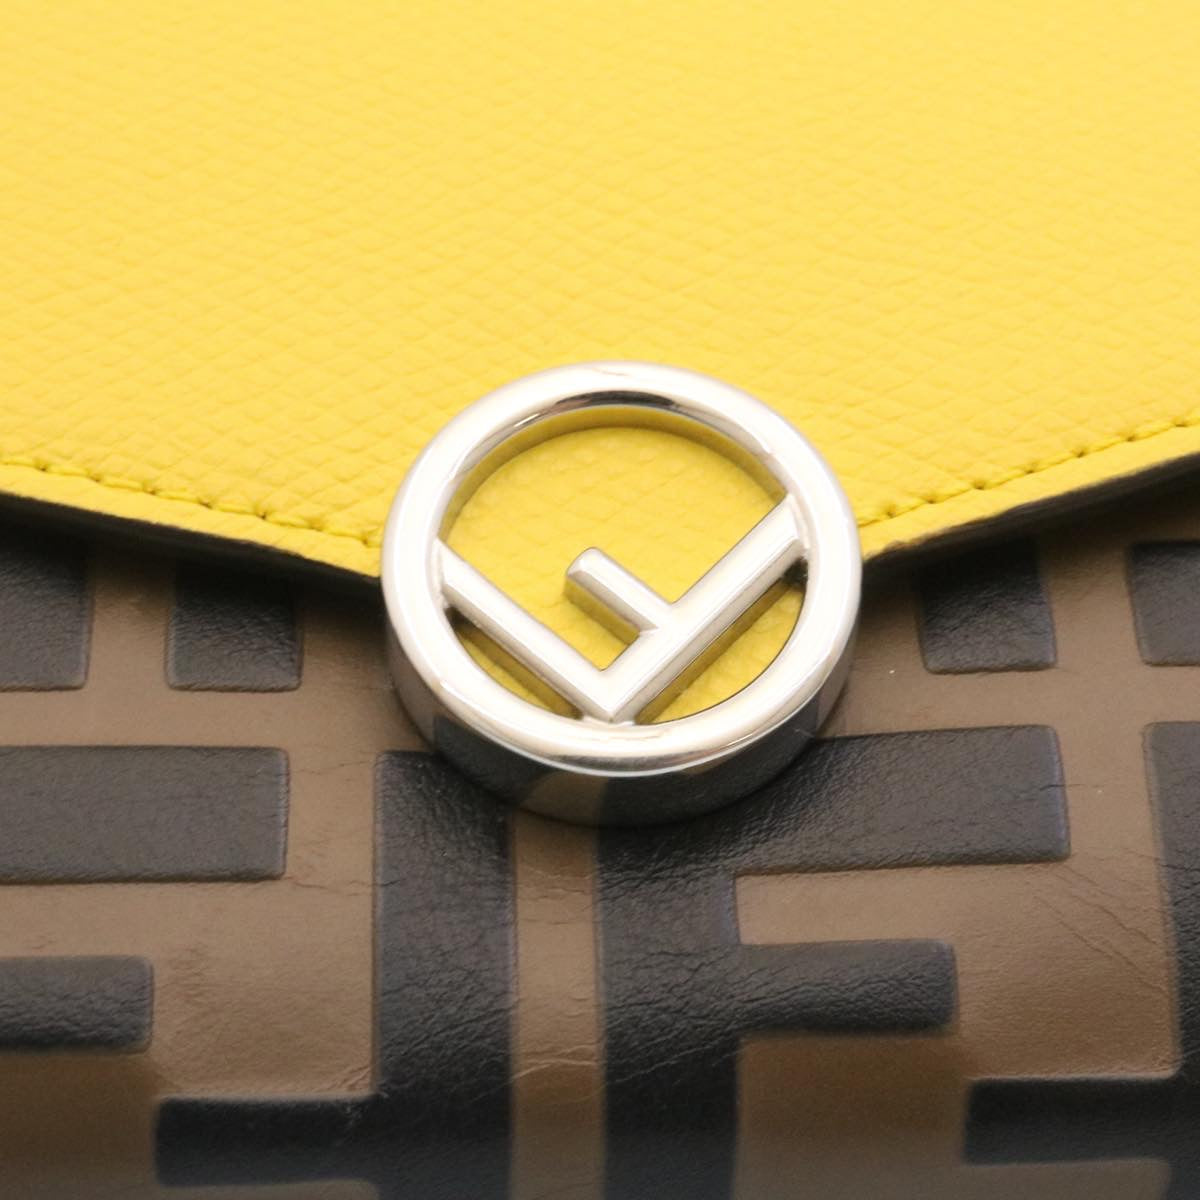 FENDI Zucca F is Continental Wallet Embossed Leather Yellow Brown Auth 34531